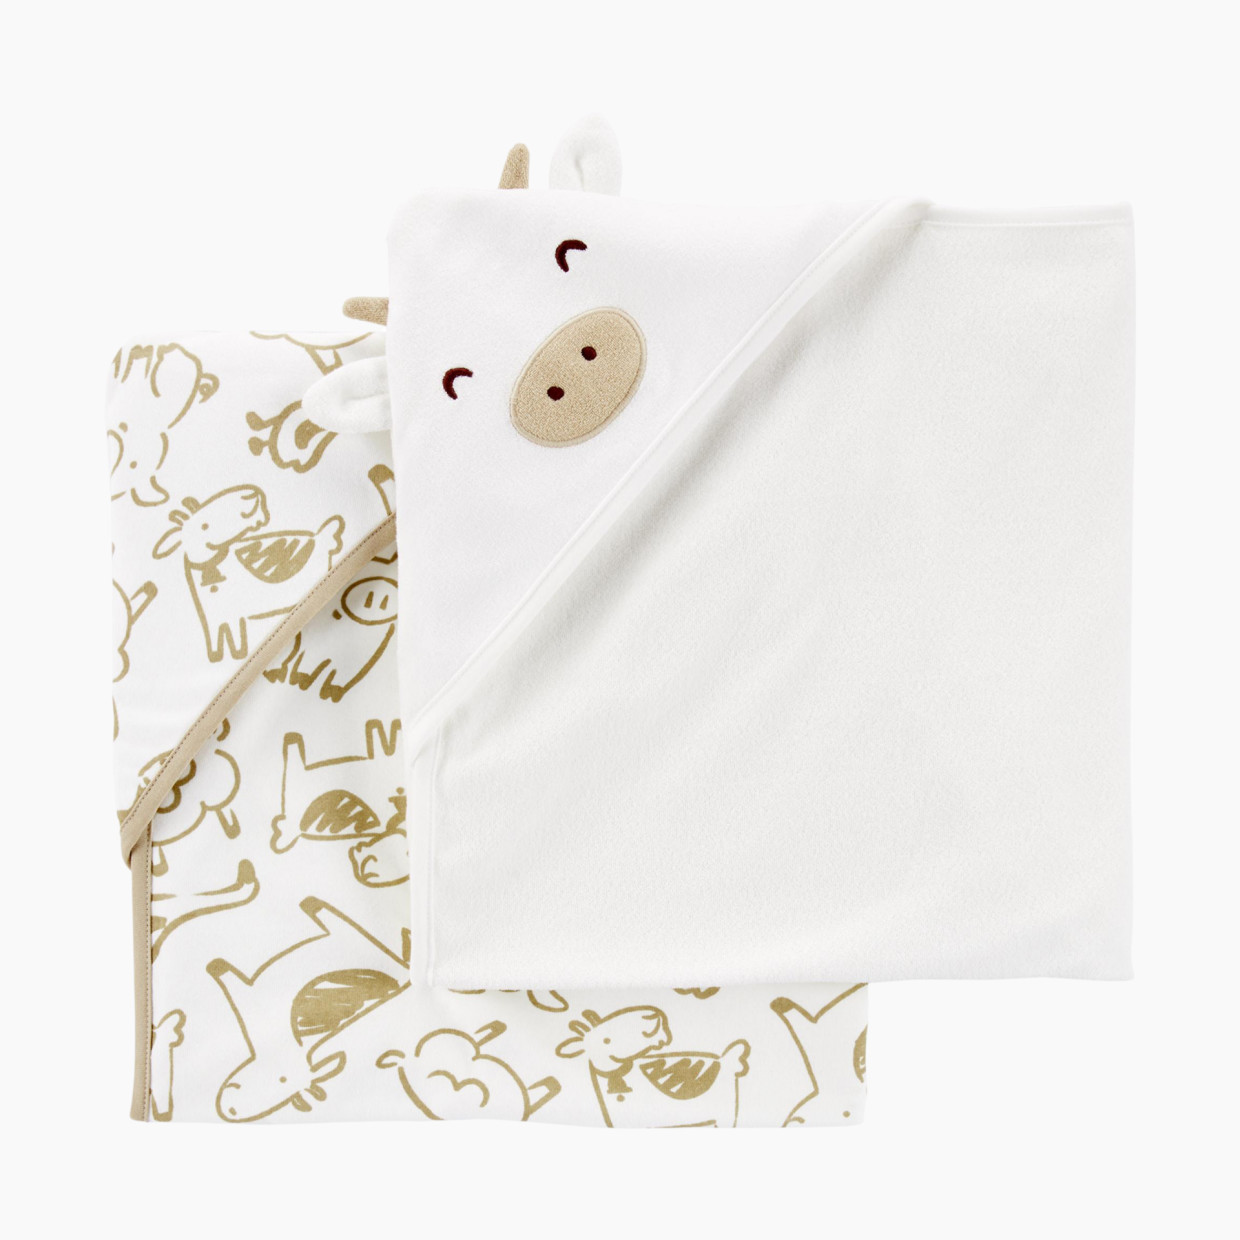 Carter's Hooded Towel (2 Pack) - Cows/Animals, O/S.